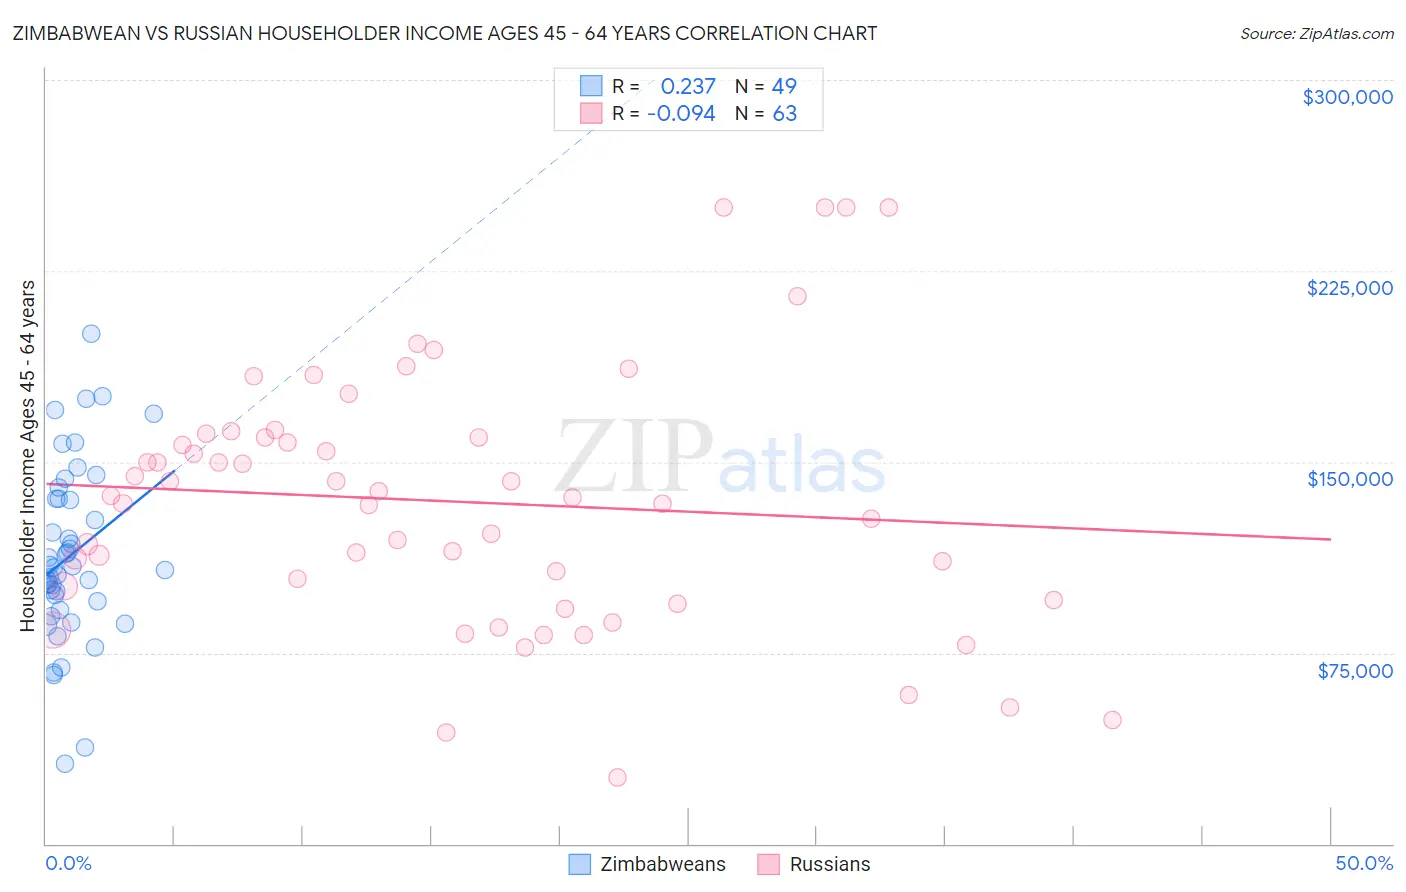 Zimbabwean vs Russian Householder Income Ages 45 - 64 years